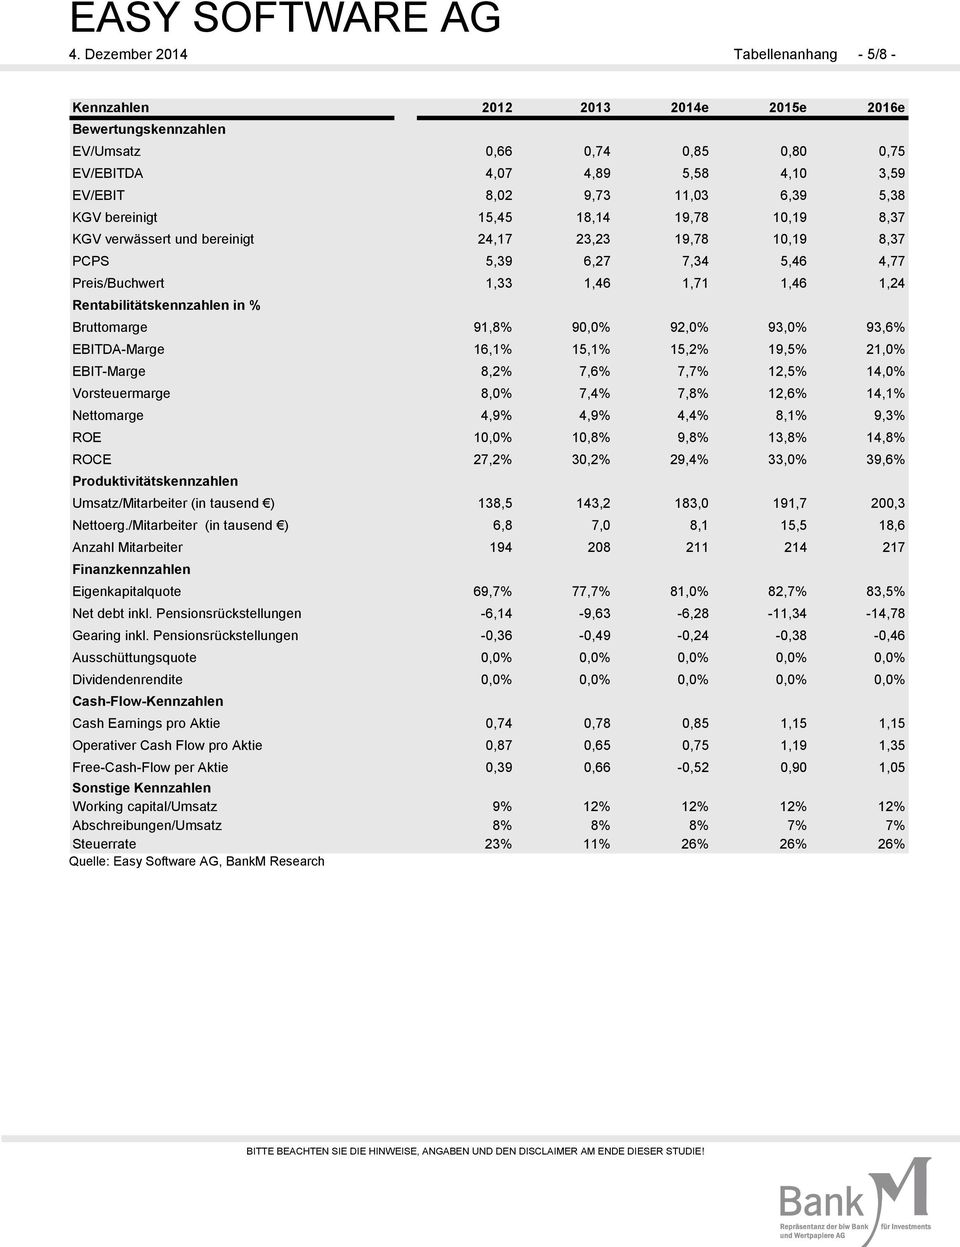 in % Bruttomarge 91,8% 90,0% 92,0% 93,0% 93,6% EBITDA-Marge 16,1% 15,1% 15,2% 19,5% 21,0% EBIT-Marge 8,2% 7,6% 7,7% 12,5% 14,0% Vorsteuermarge 8,0% 7,4% 7,8% 12,6% 14,1% Nettomarge 4,9% 4,9% 4,4%